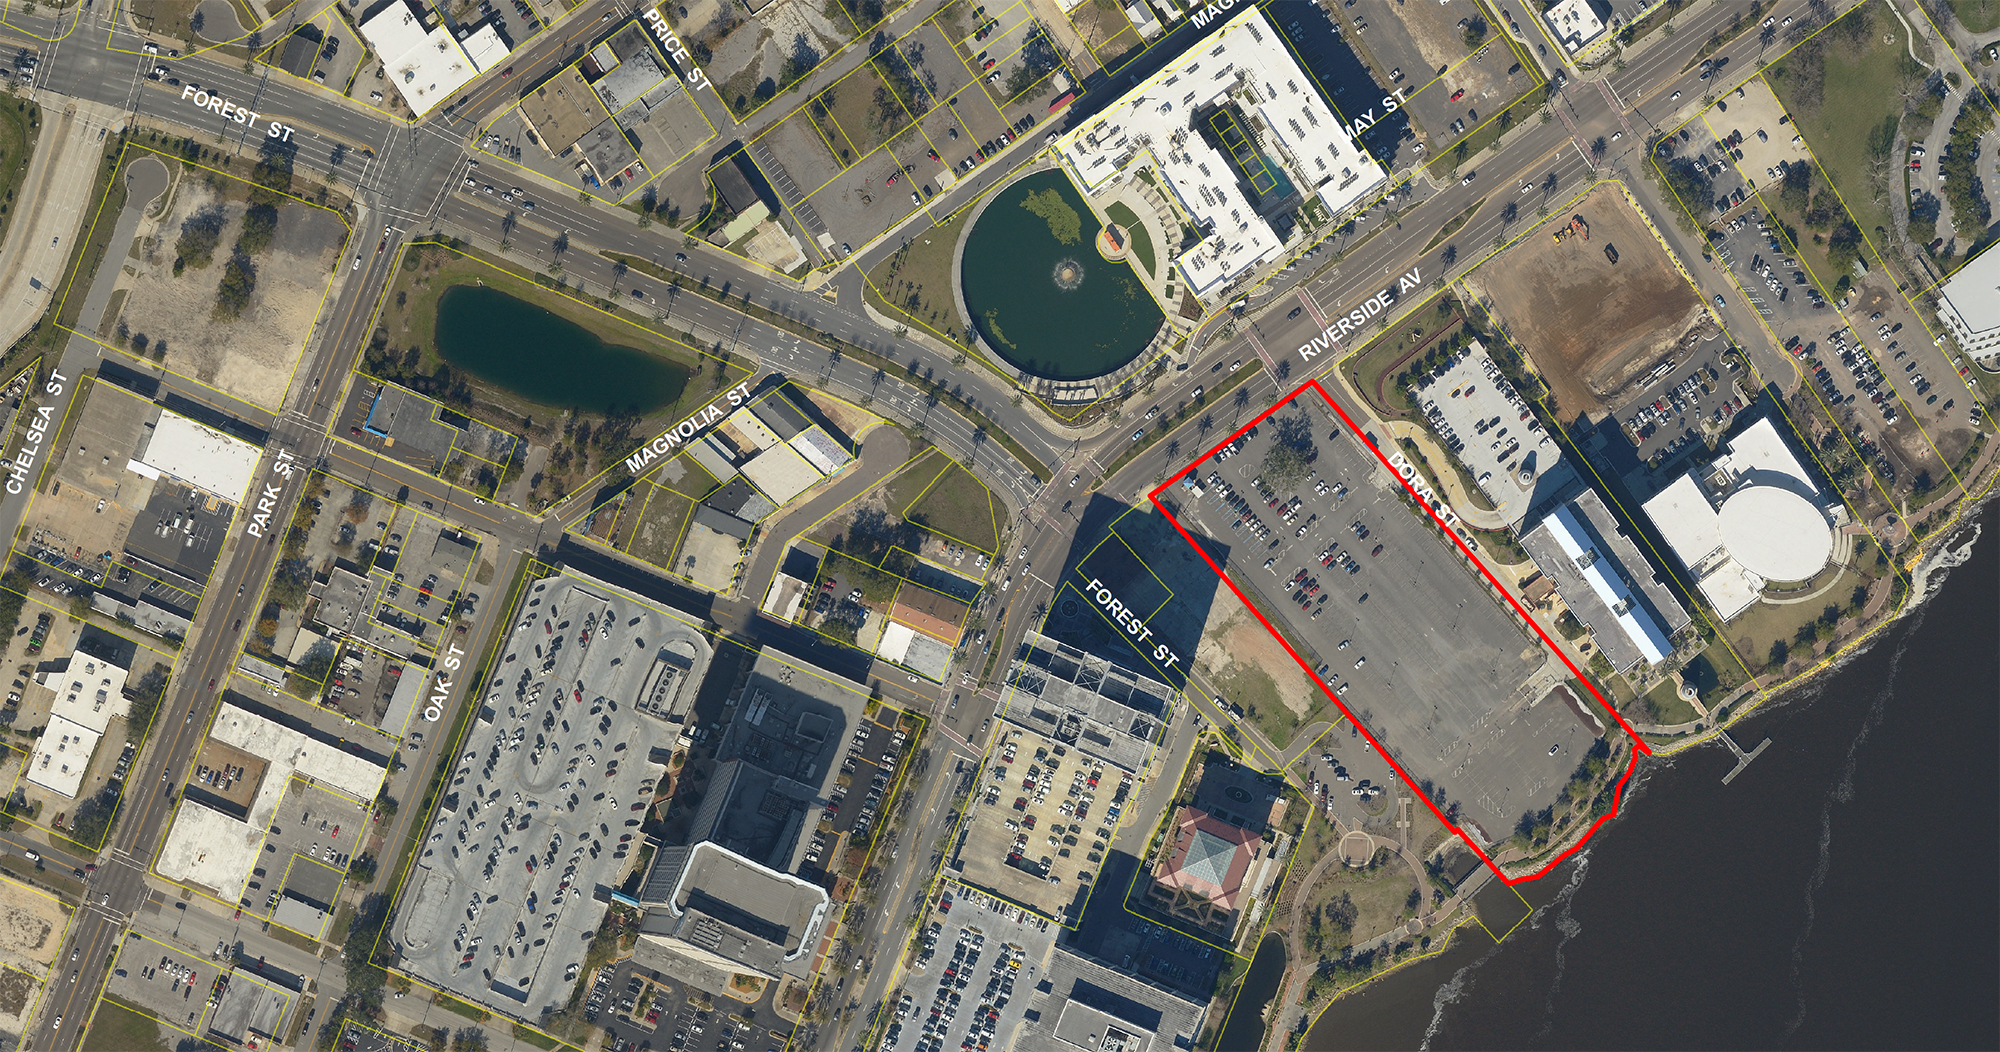 This aerial photograph included in DIA documentation shows the Florida Blue surface parking lot as the intended site for Project Sharp’s proposed $145 million headquarters.